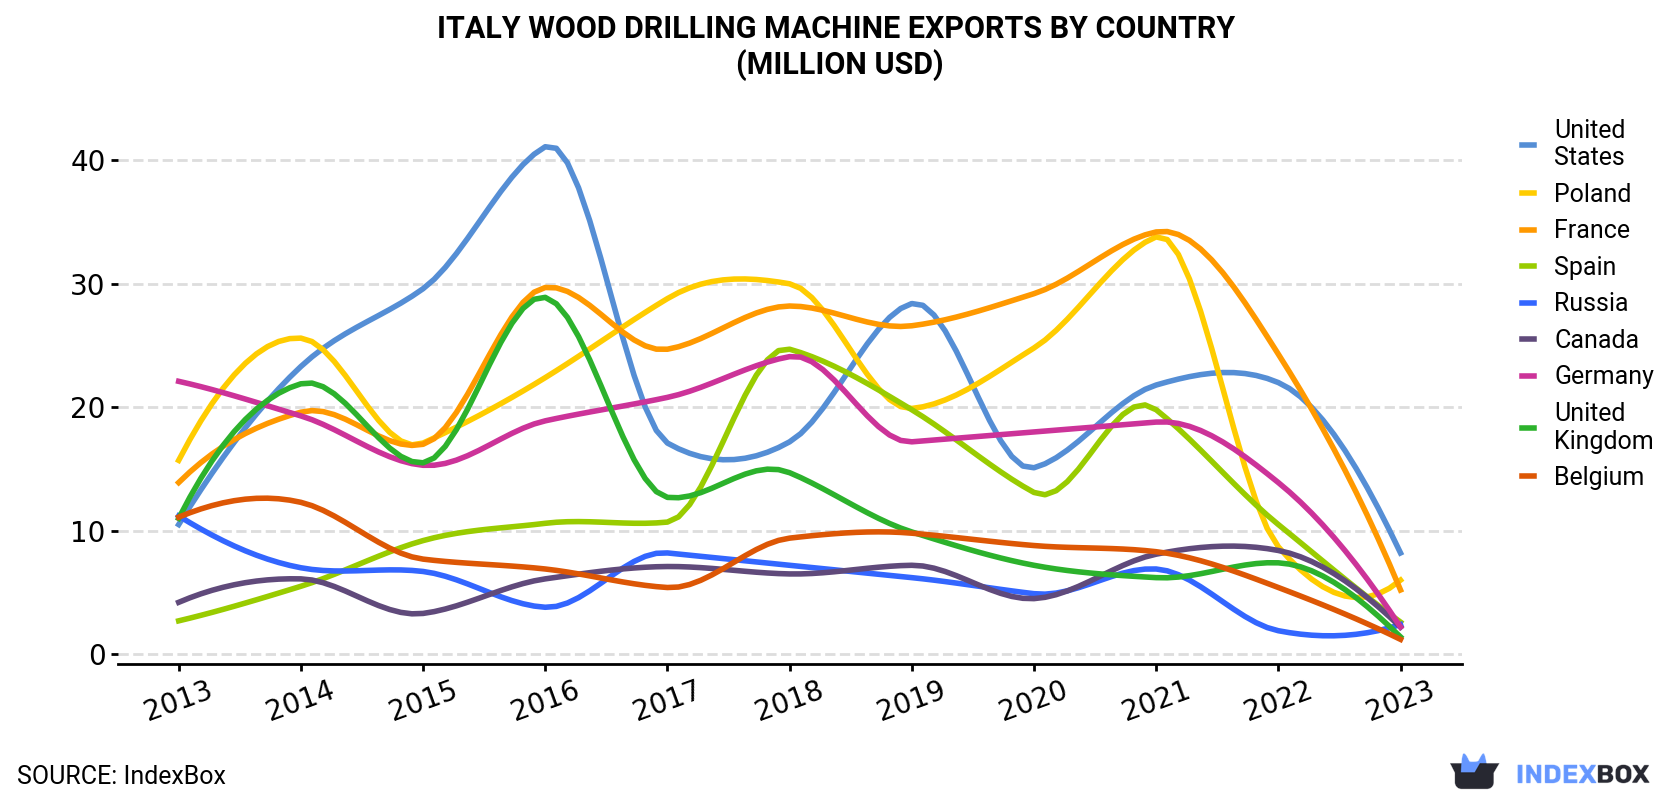 Italy Wood Drilling Machine Exports By Country (Million USD)